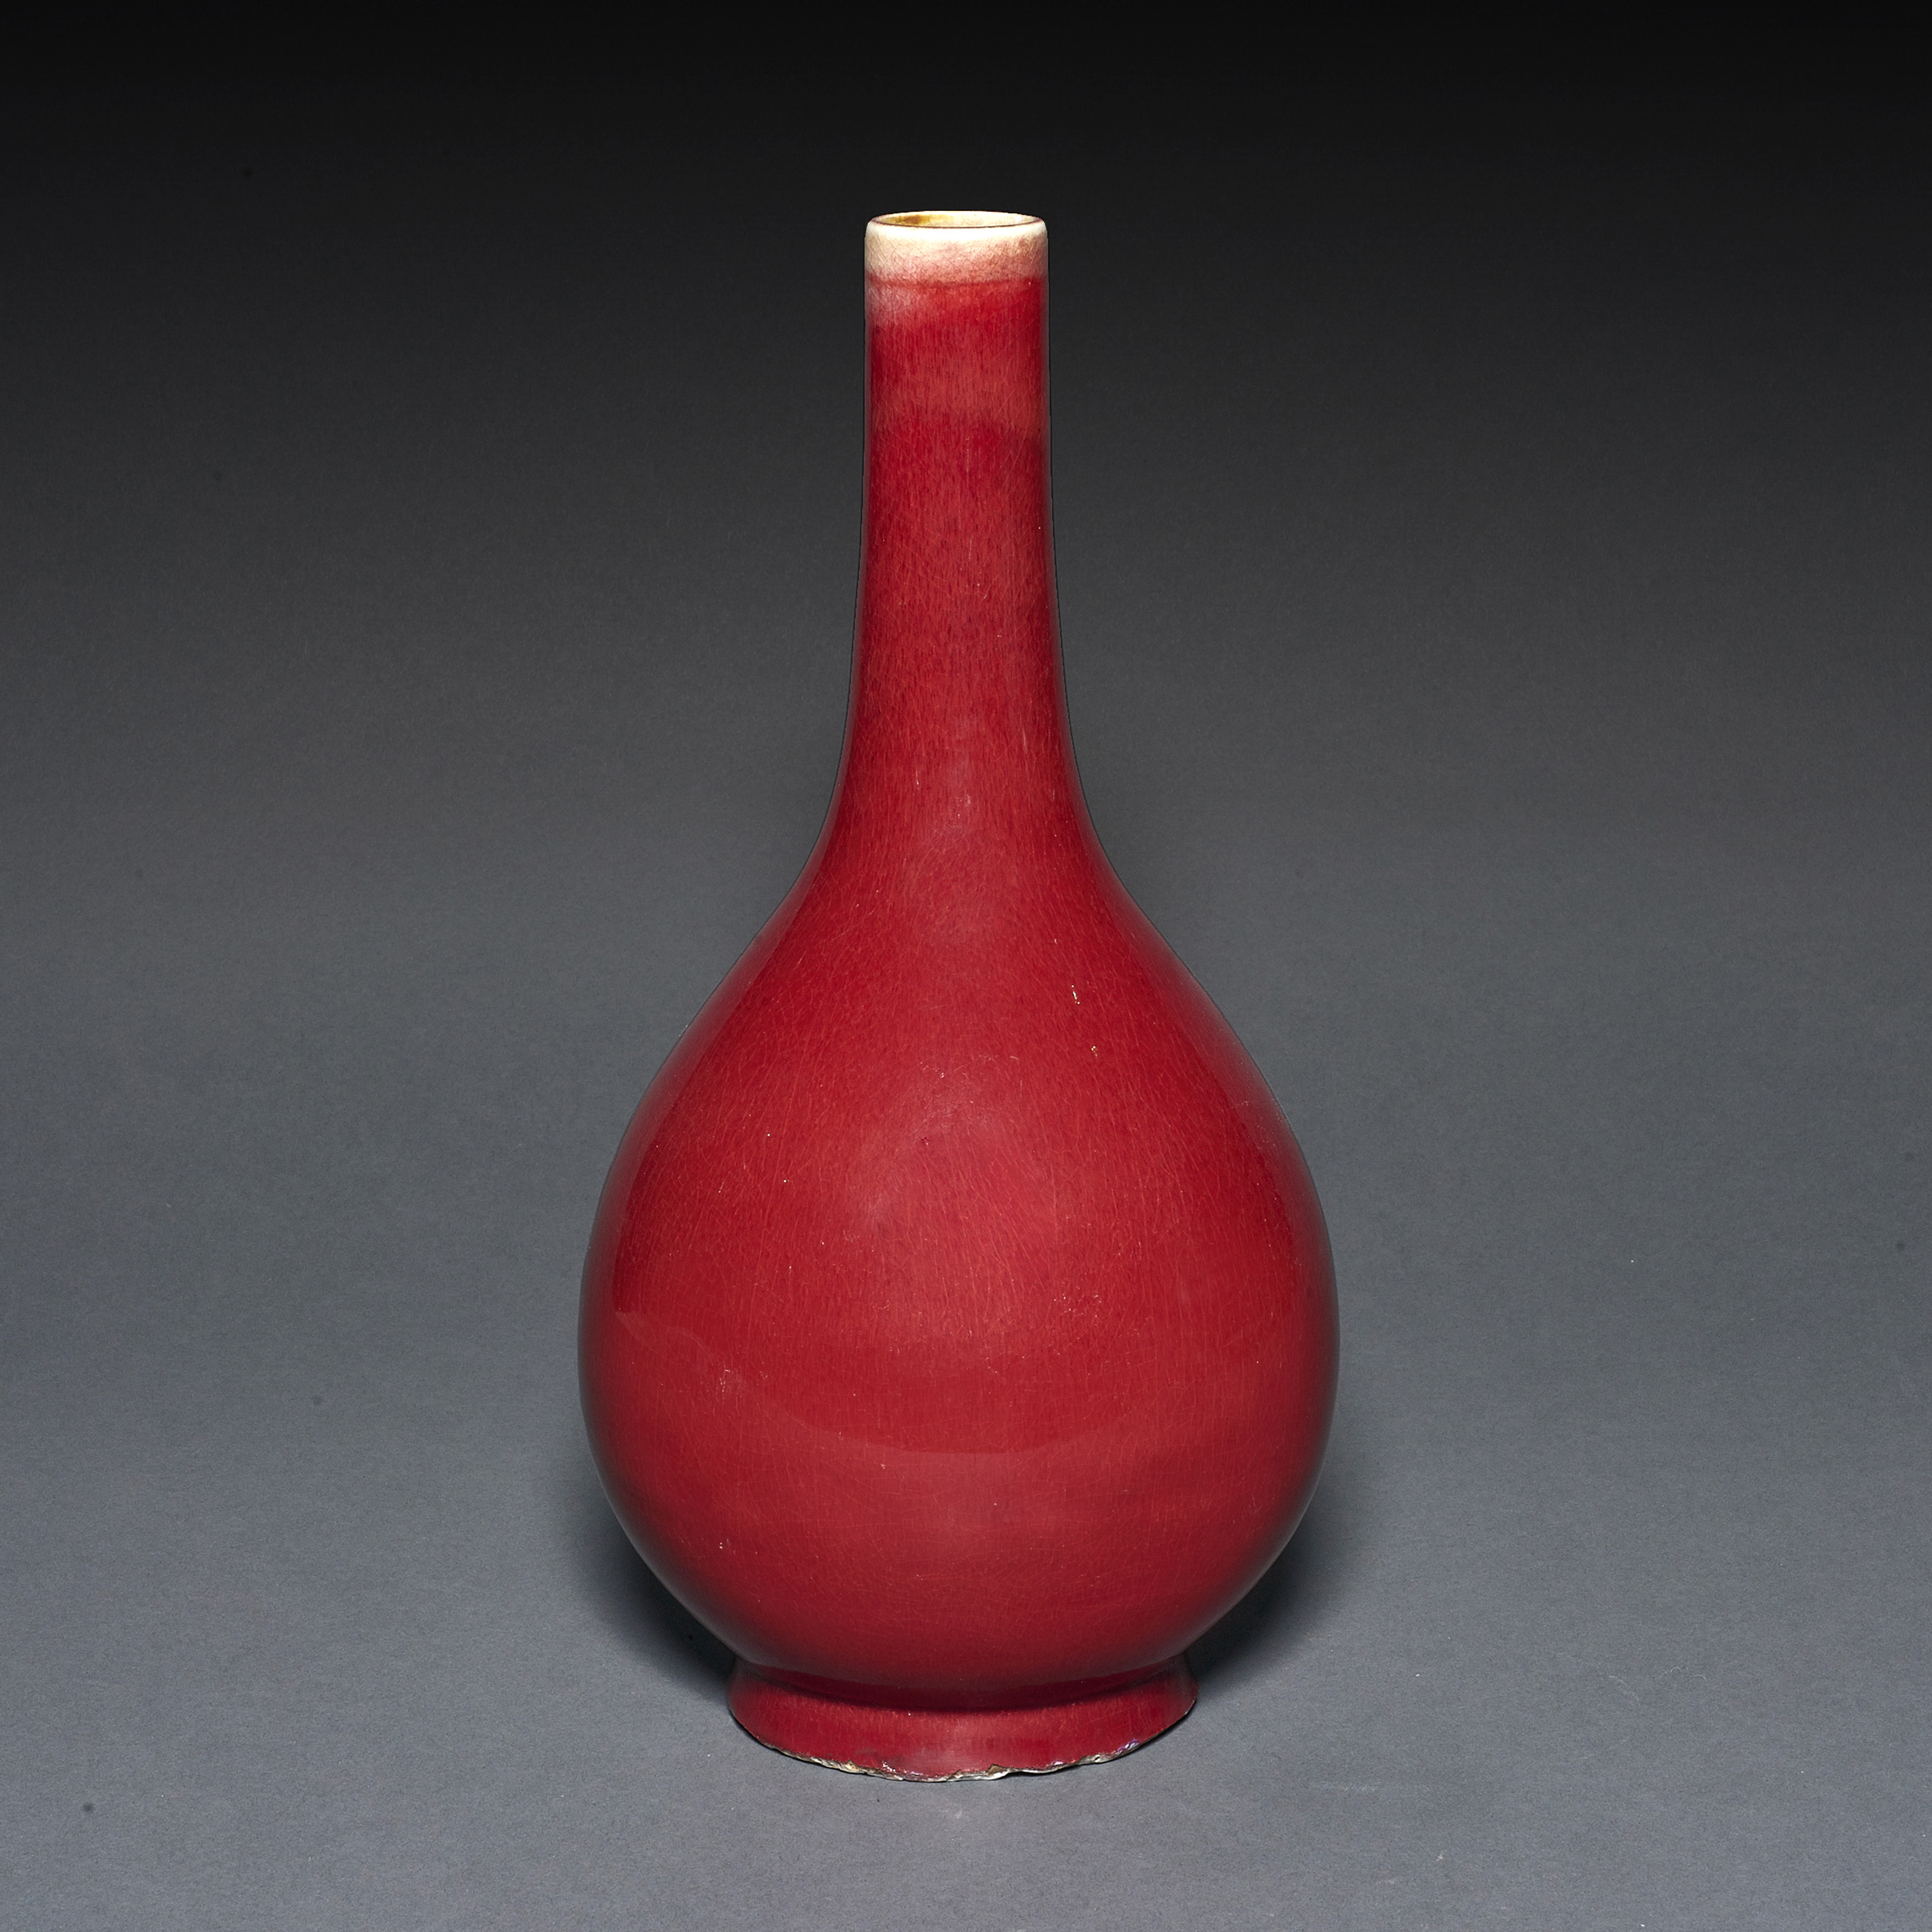 CHINESE LANGYAO TYPE BOTTLE VASE 3a496d